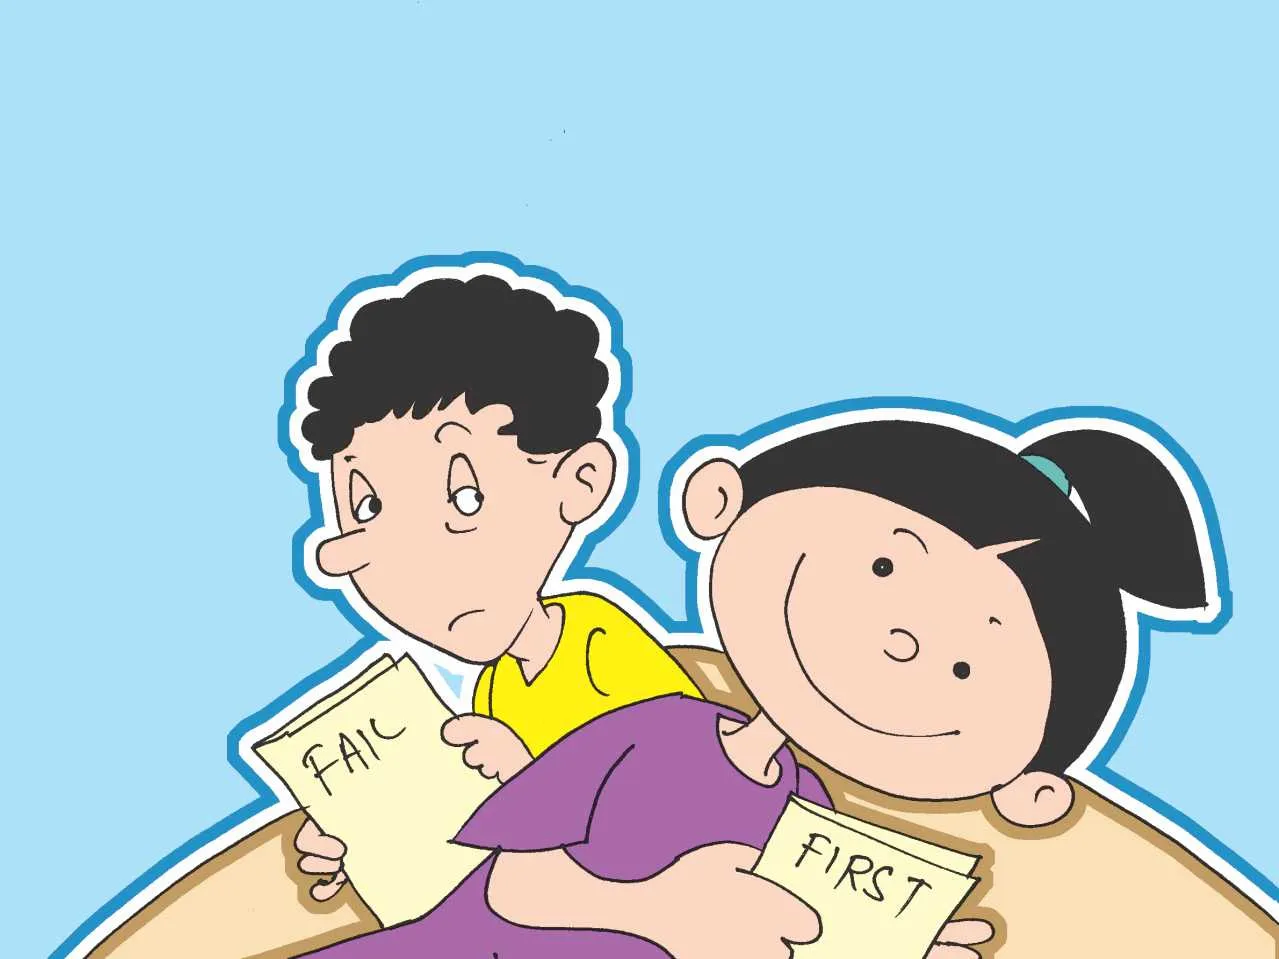 Two kids with their results cartoon image